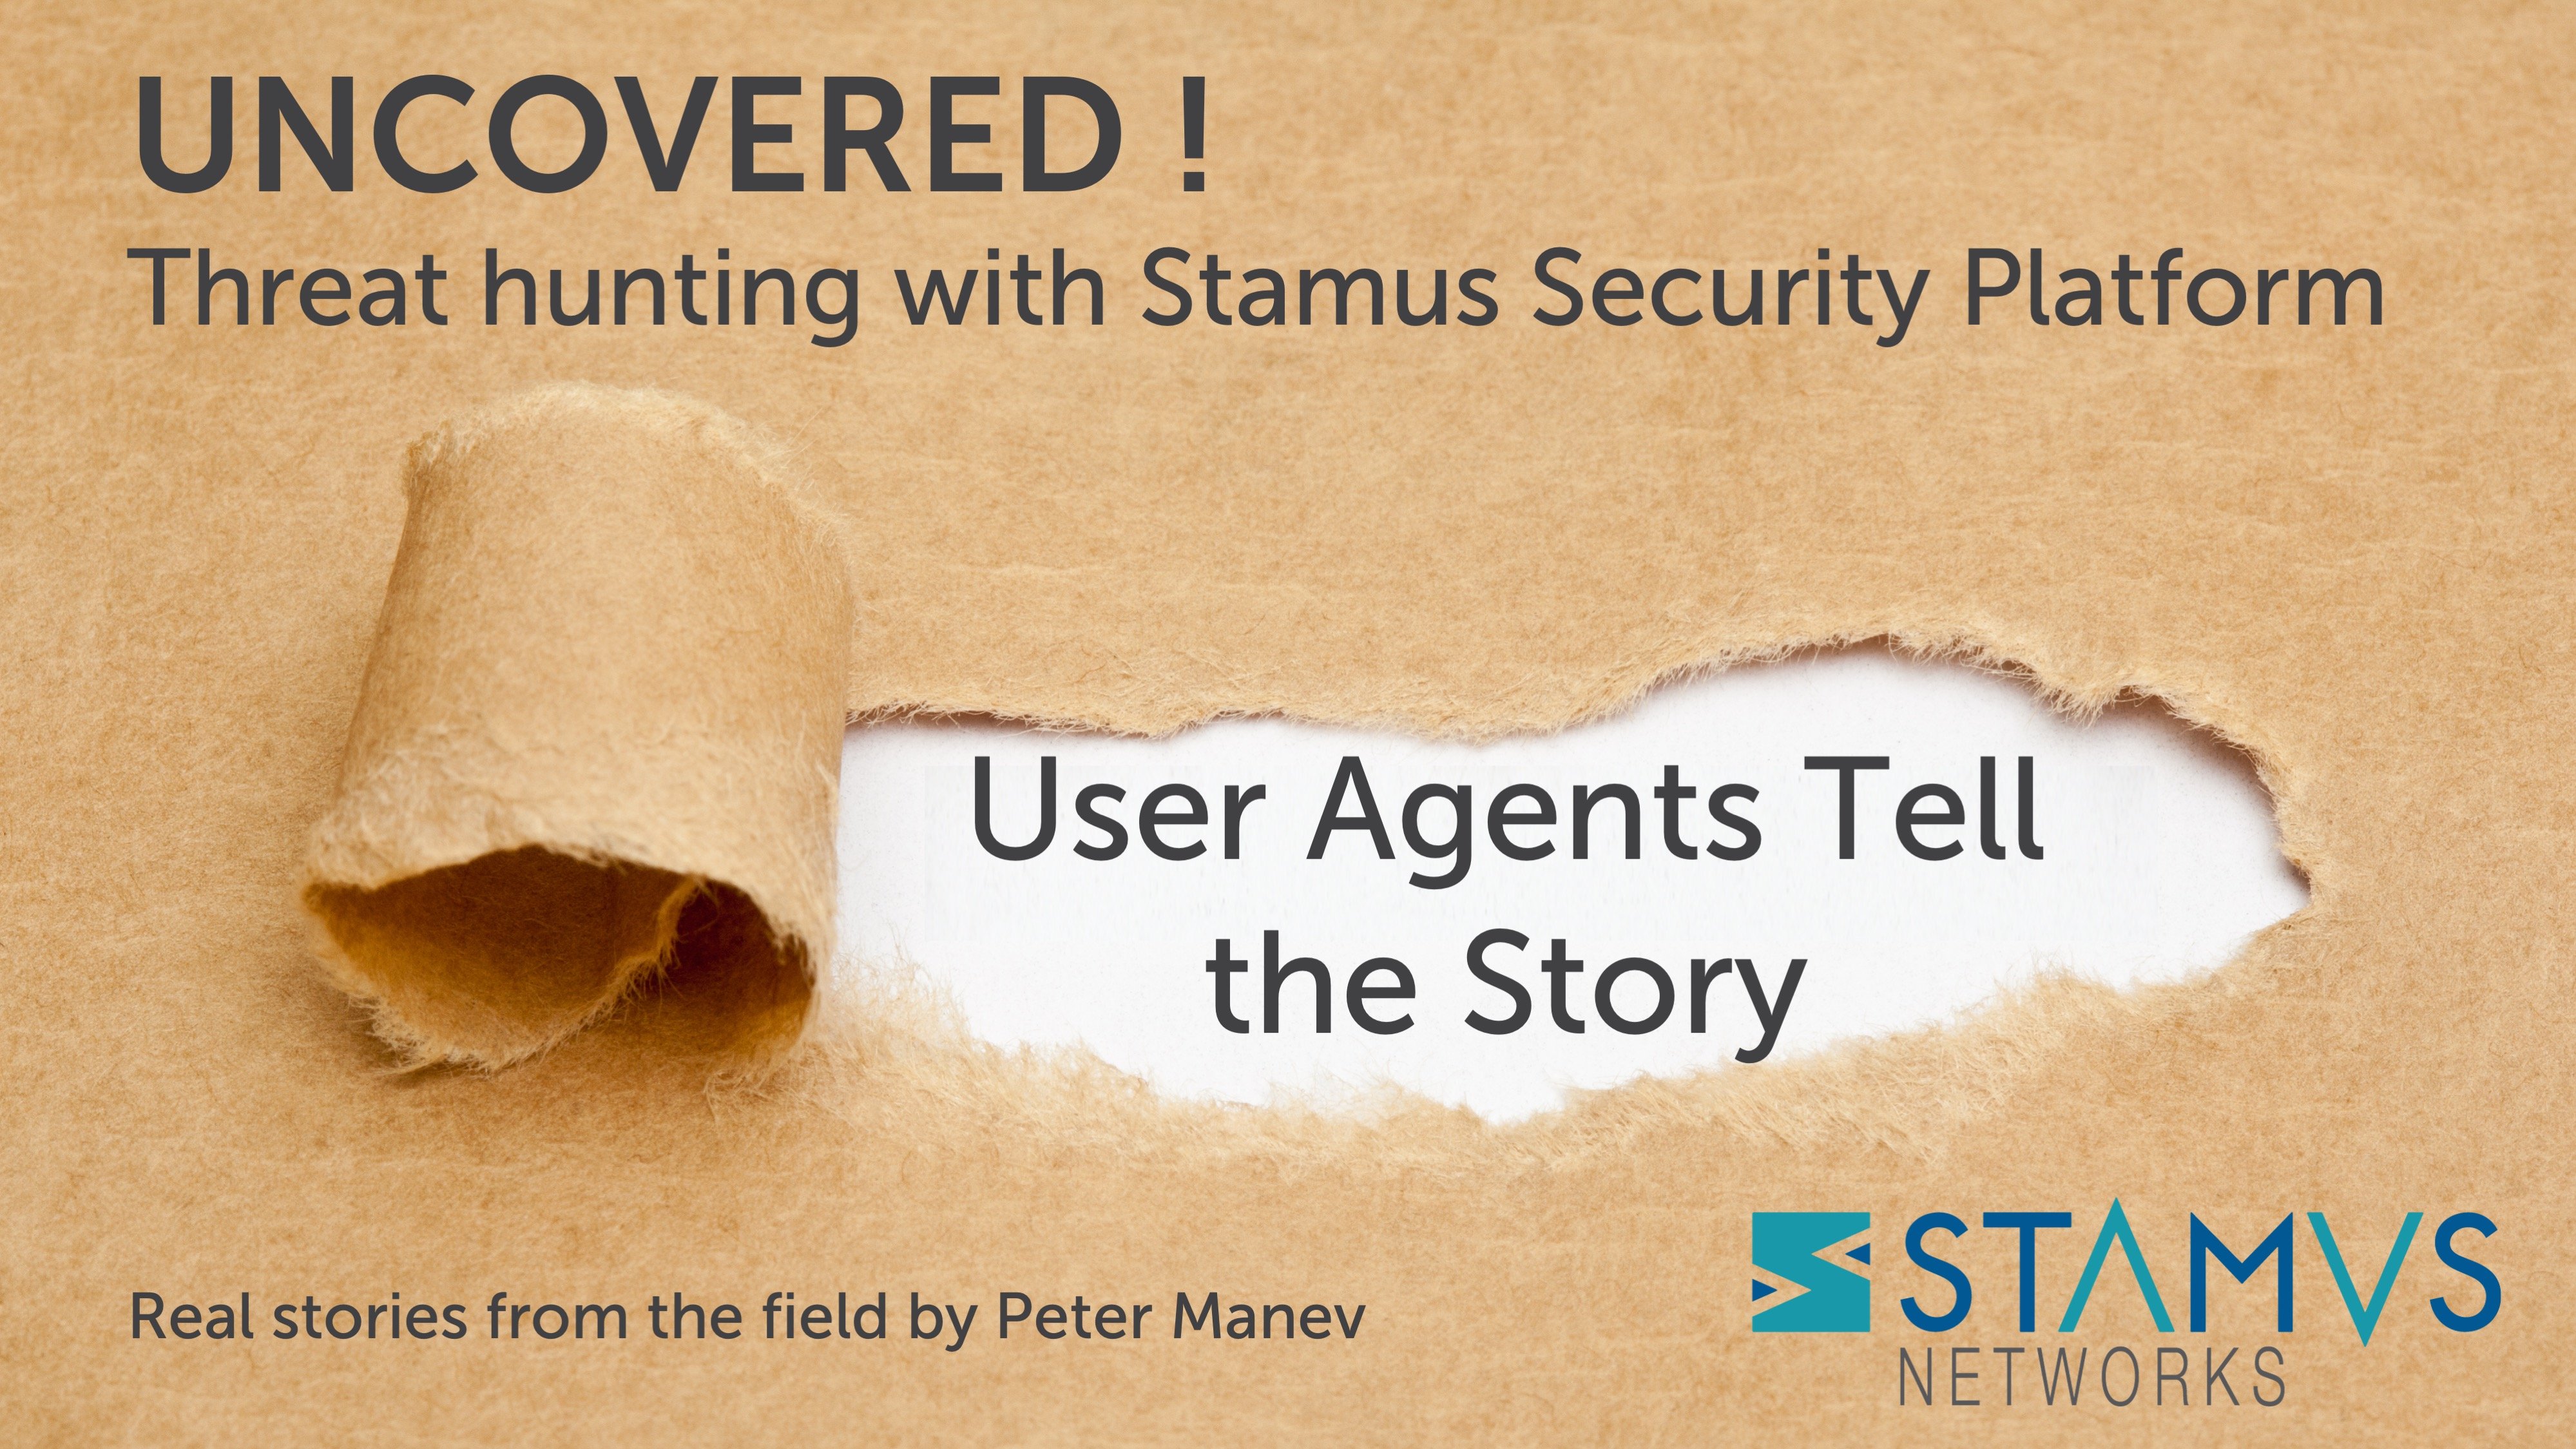 Threat Hunting with Stamus Security Platform: User Agents Tell the Story 